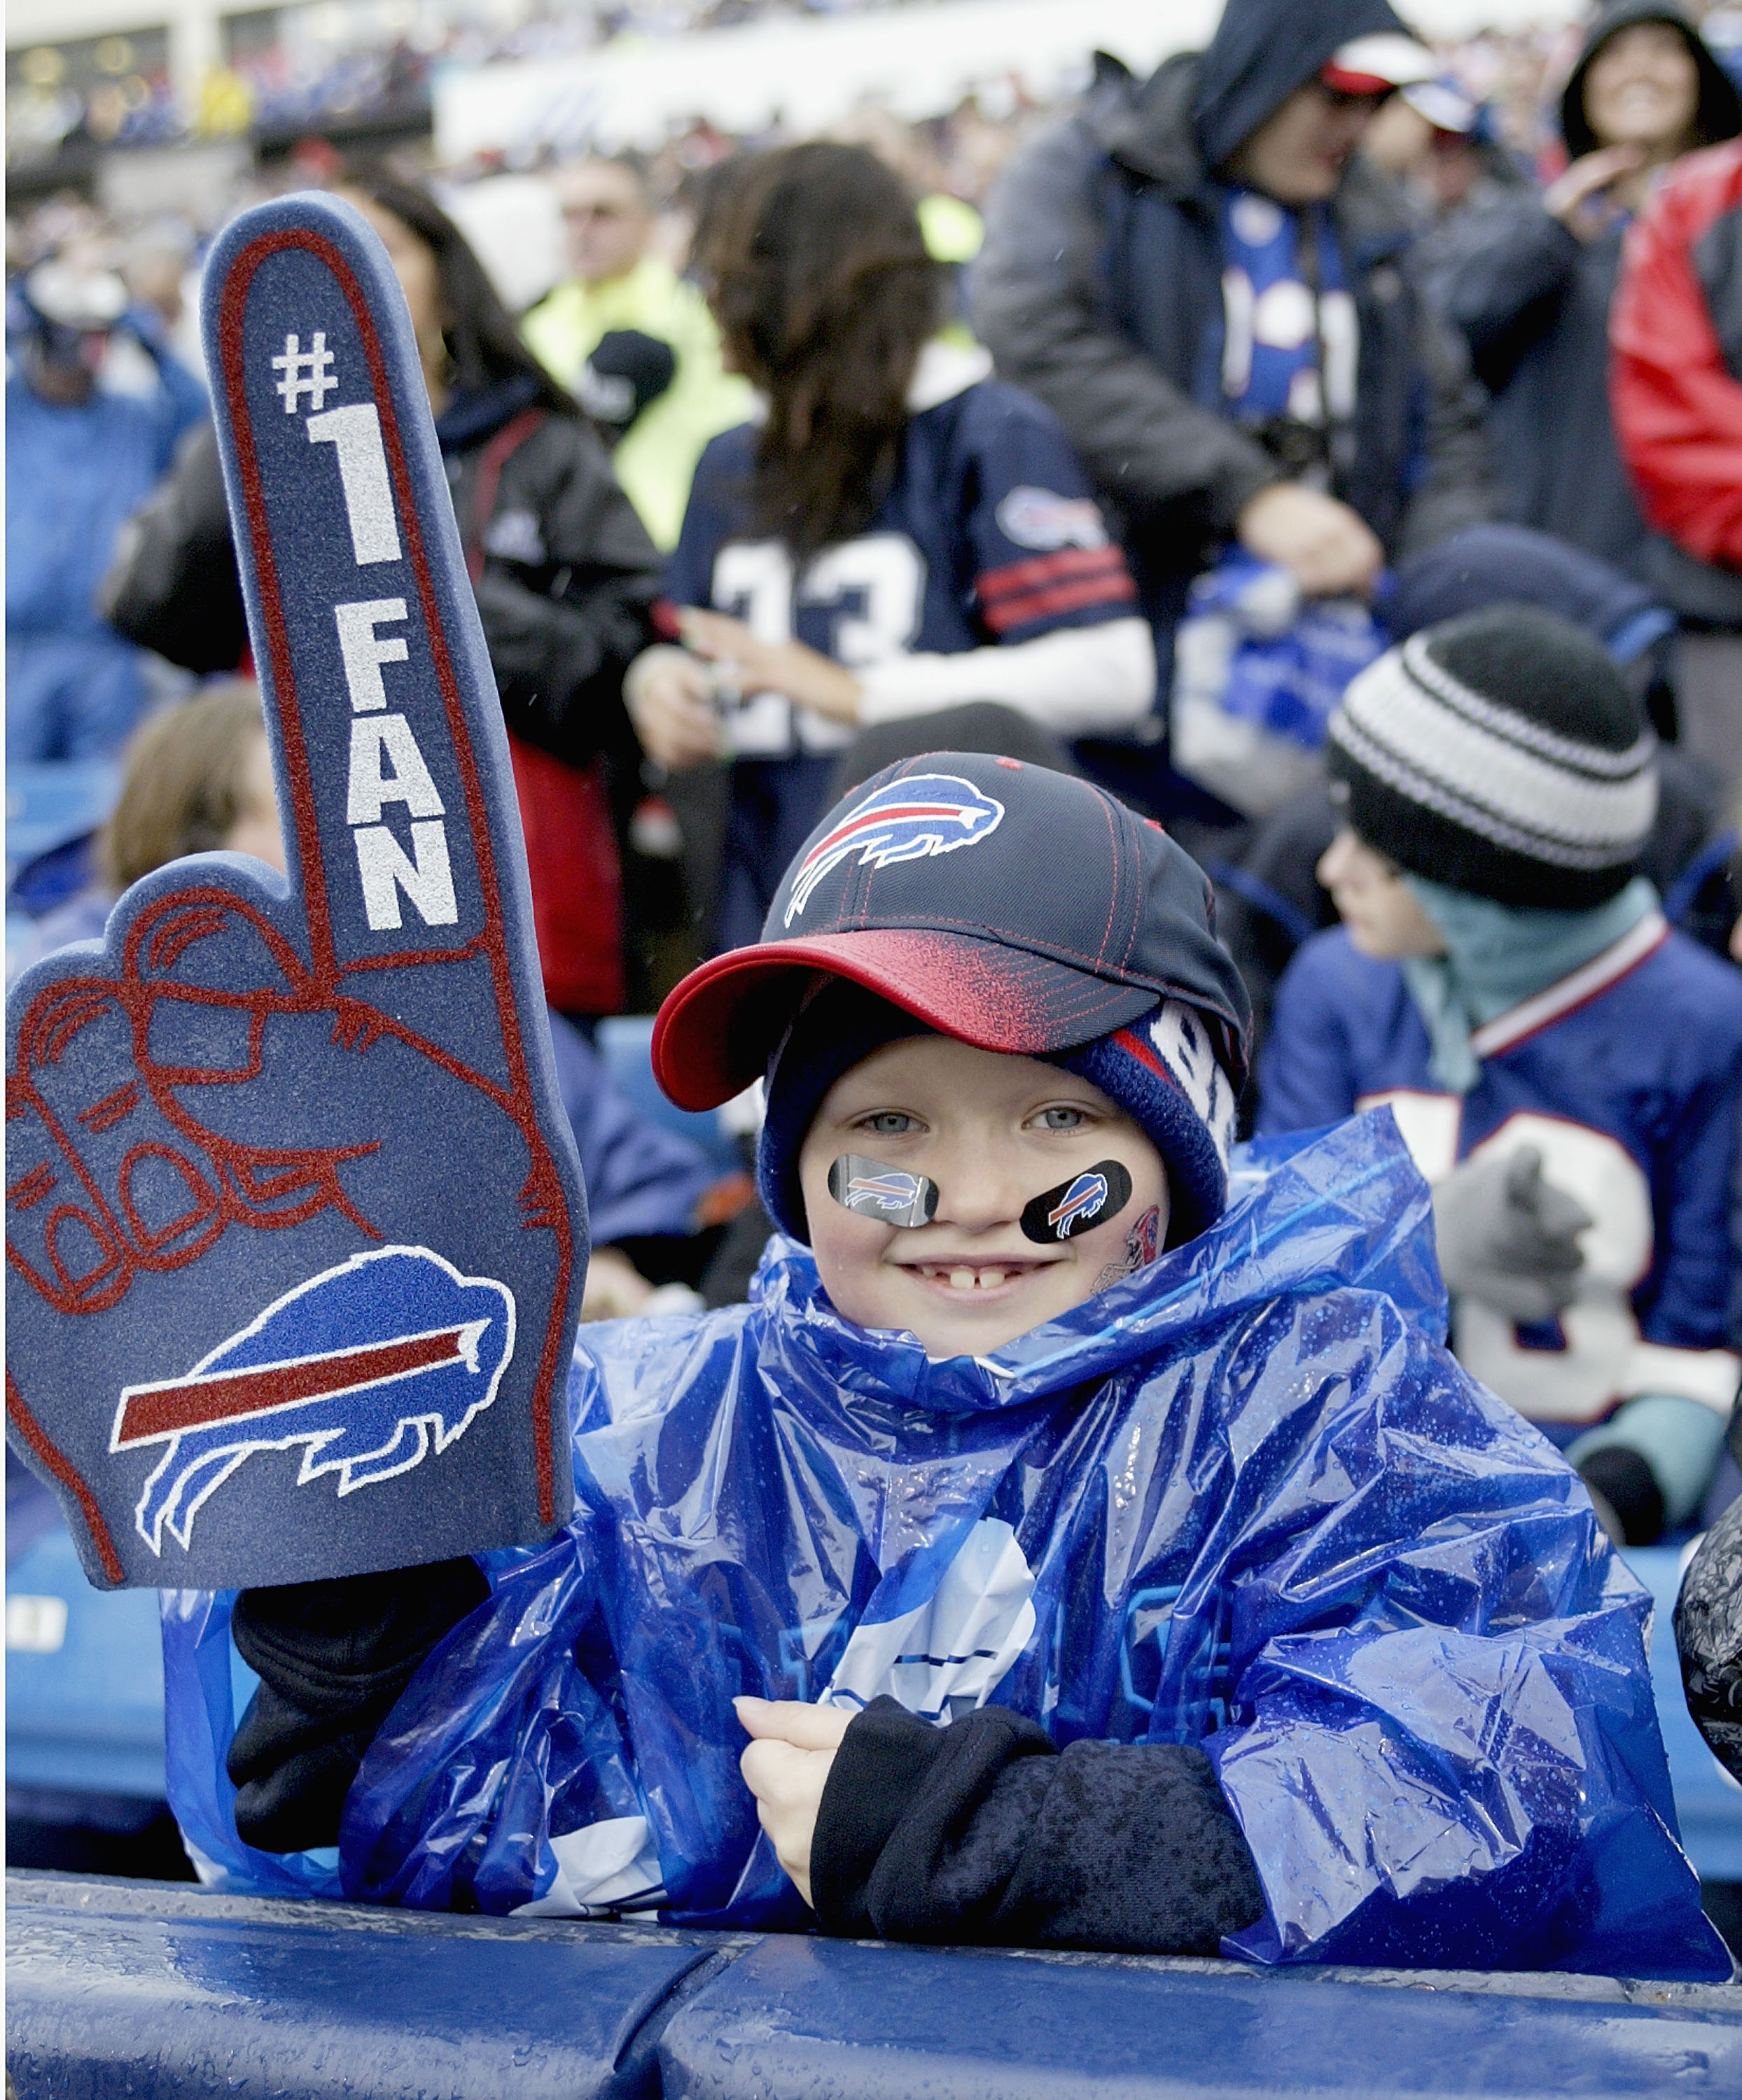 ORCHARD PARK, NY - OCTOBER 03: A young Buffalo Bills fan shows his support against the New York Jets   at Ralph Wilson Stadium on October 3, 2010 in Orchard Park, New York. The Jets won 38-14. (Photo by Rick Stewart/Getty Images)